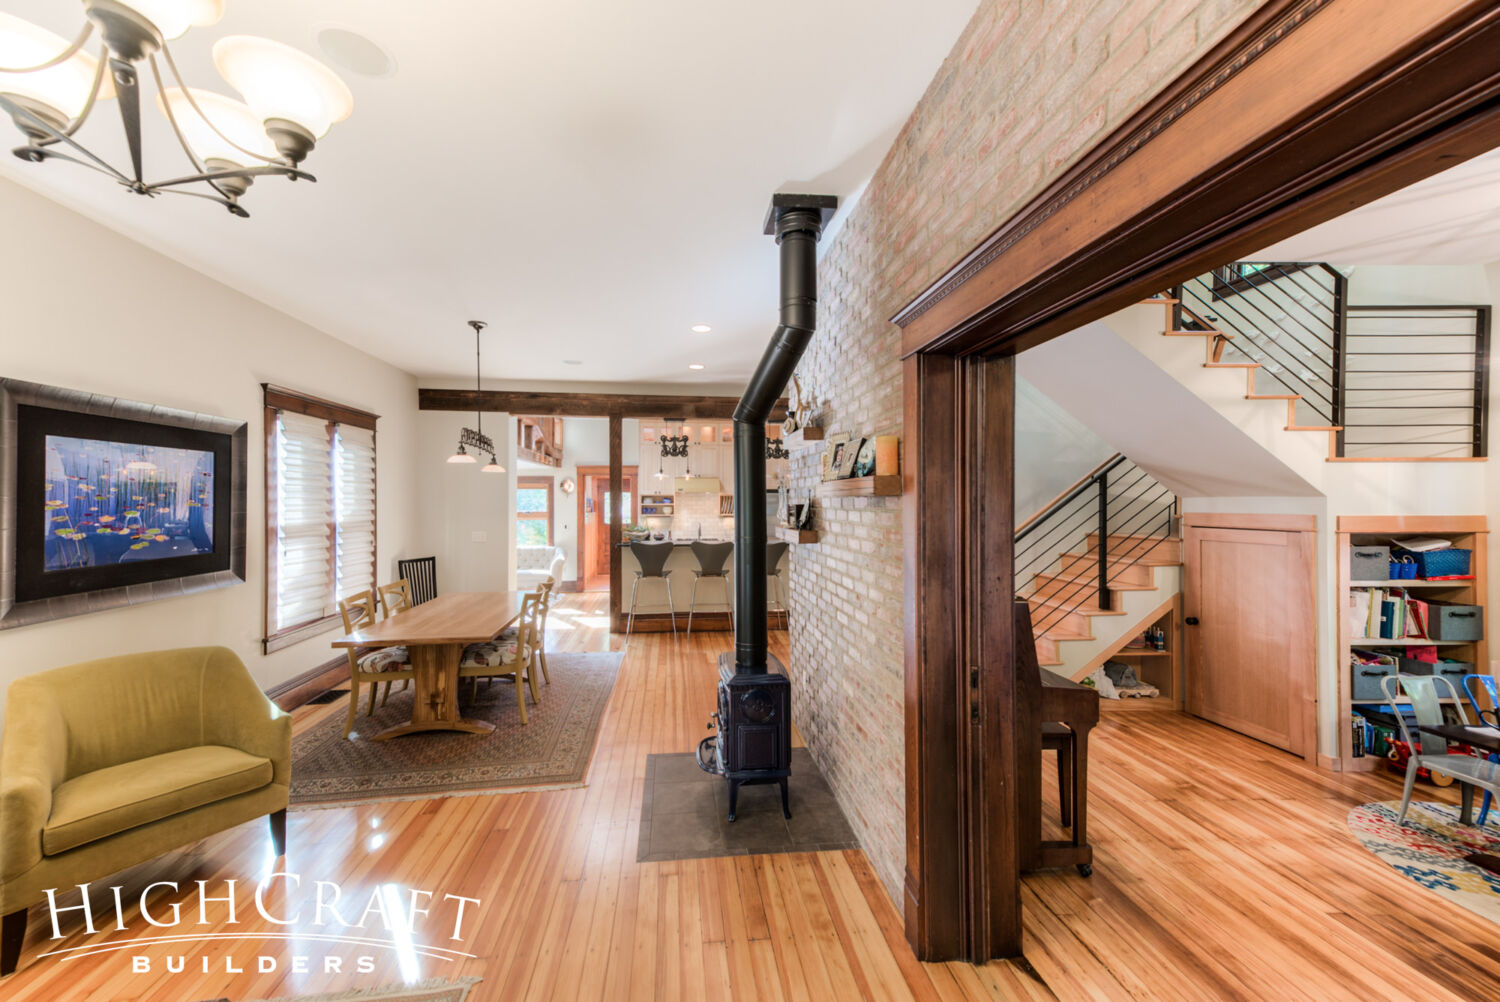 Historic-Second-Story-Addition-Free-Standing-Wood-Fireplace-Wood-Frame-Casing-Brick-Wall